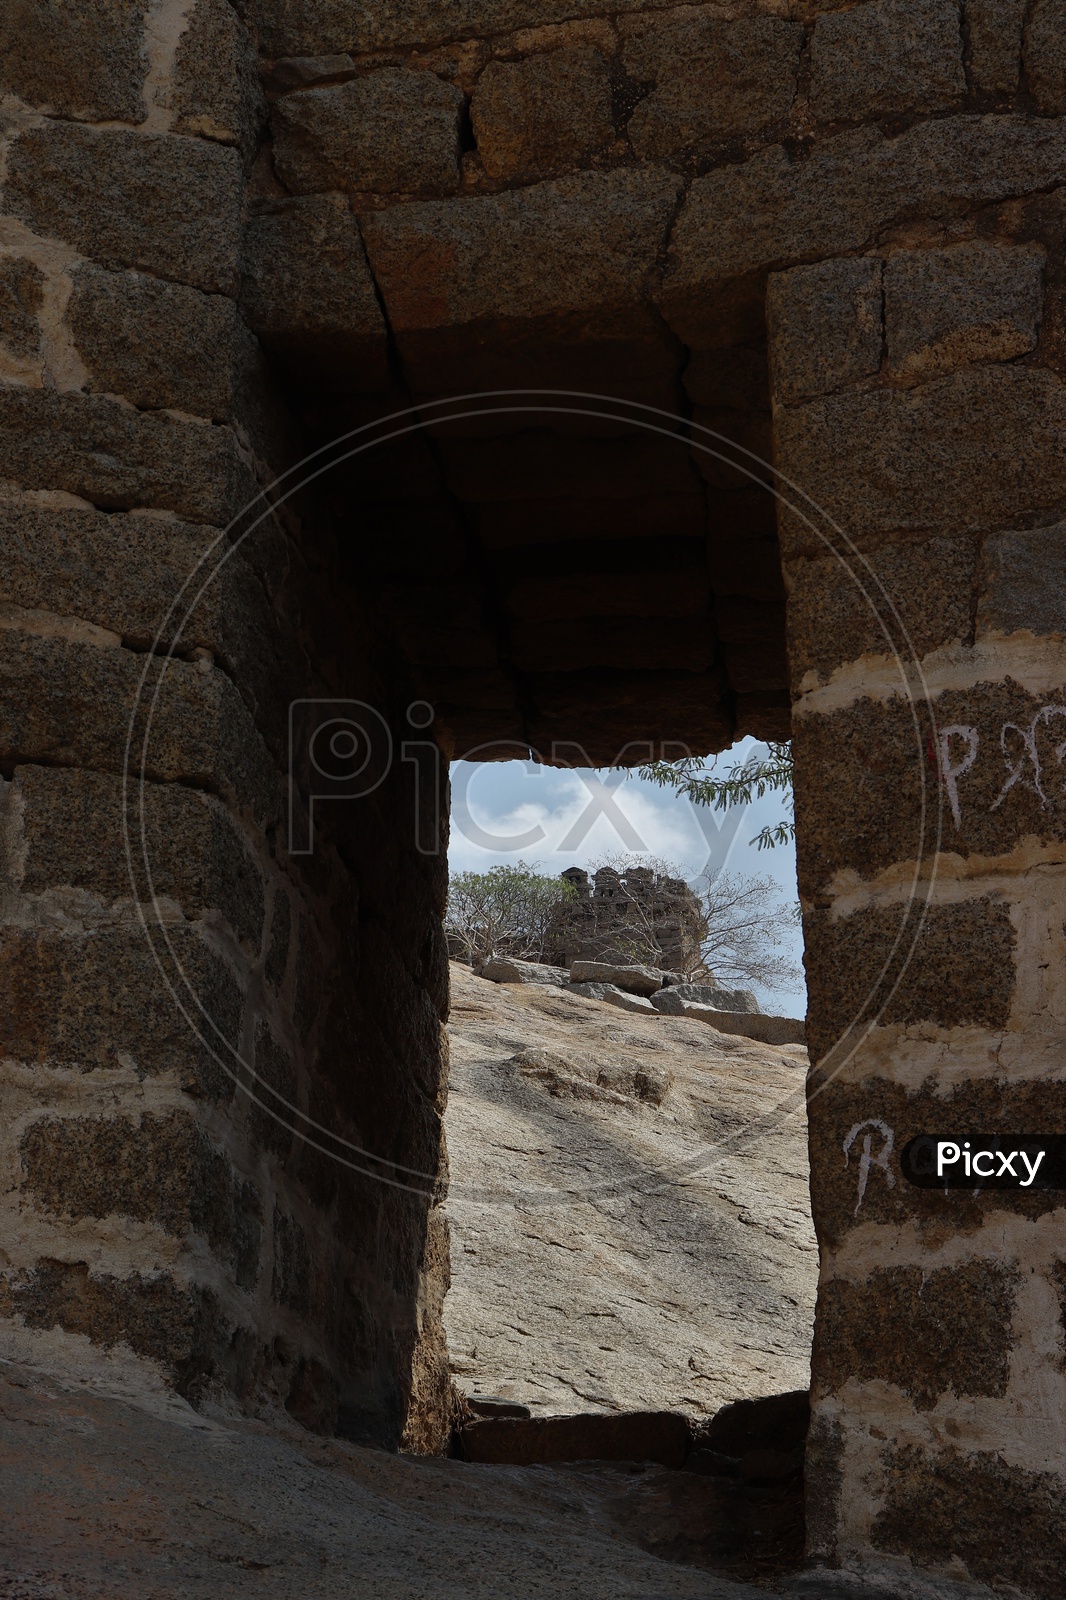 Architectural Views of Bhongir Fort